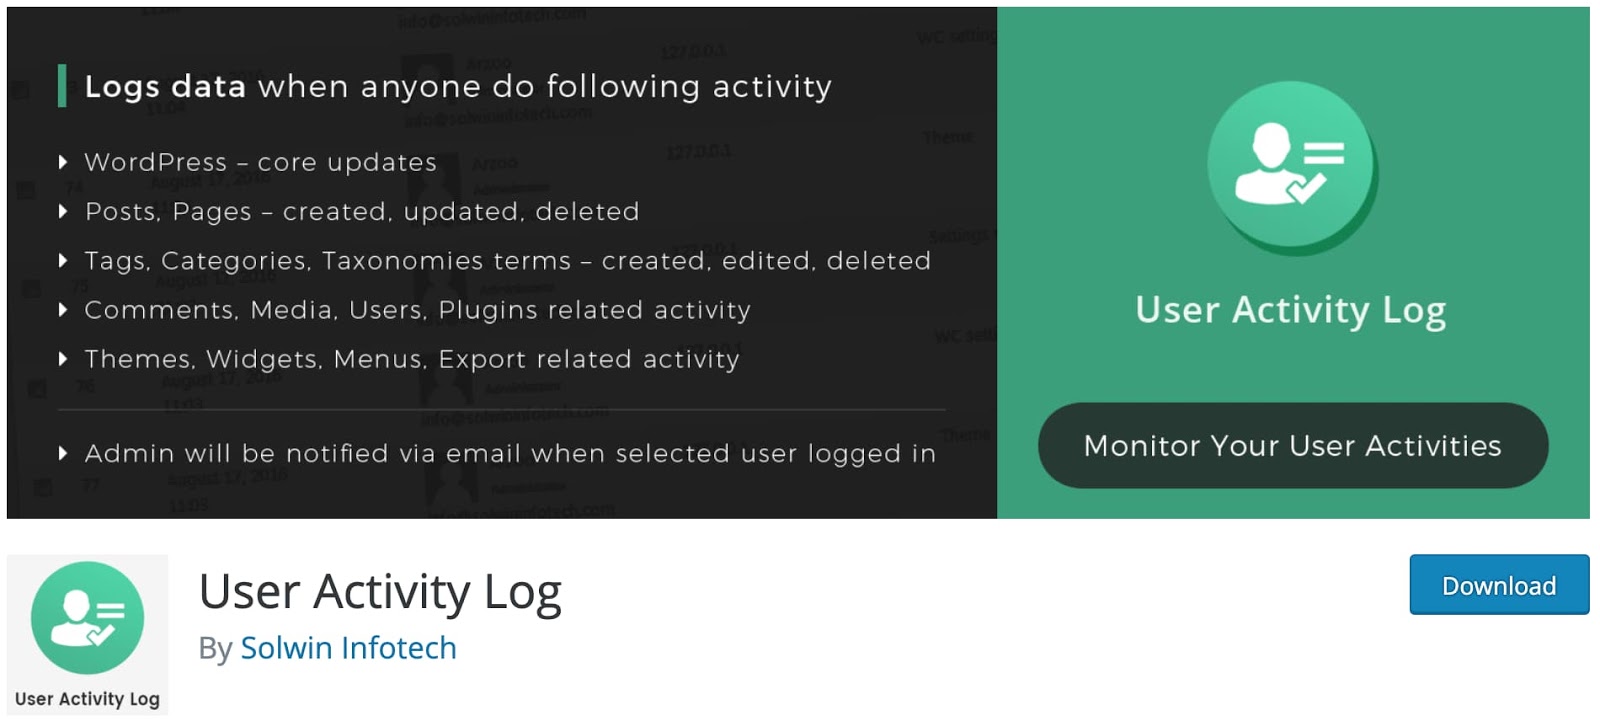 wordpress tracking plugin user activity log product page User Activity Log: Enhance website security, receive email notifications, and enjoy compatibility with popular plugins like BuddyPress and WooCommerce. No additional setup required for seamless monitoring.